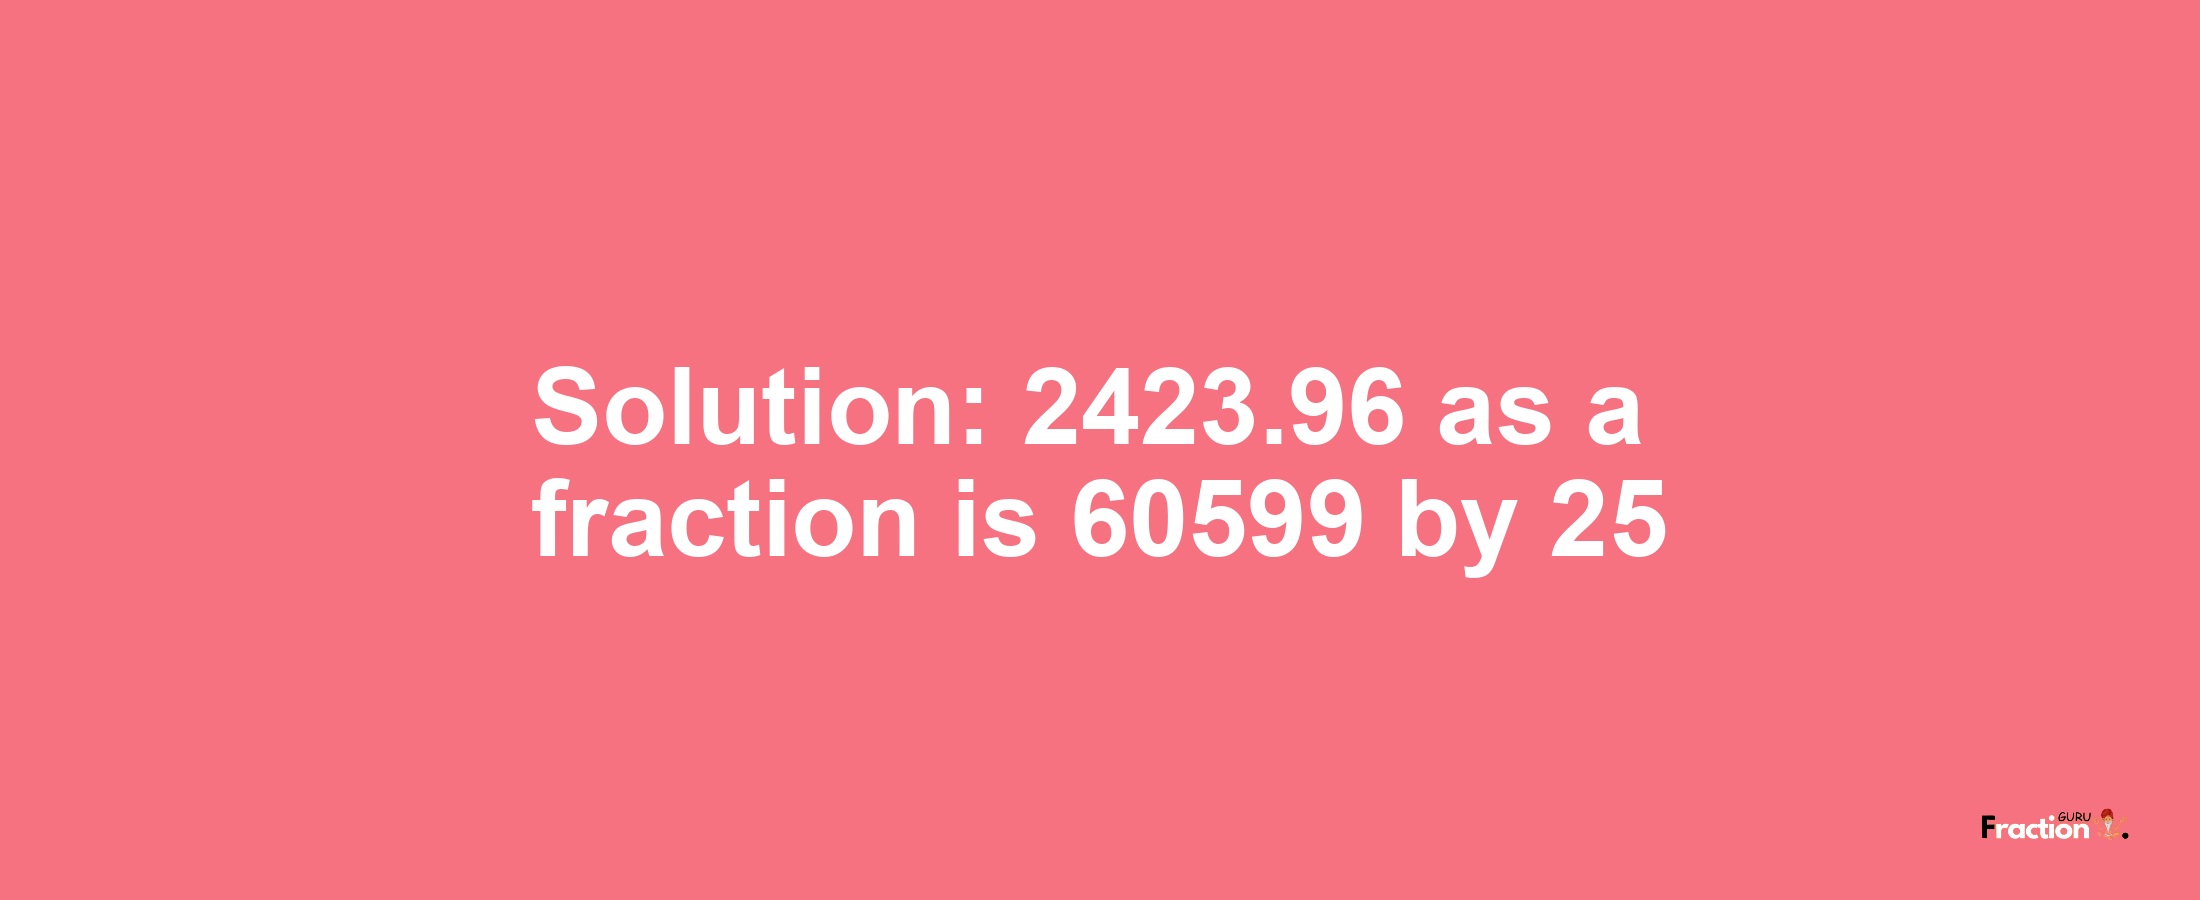 Solution:2423.96 as a fraction is 60599/25